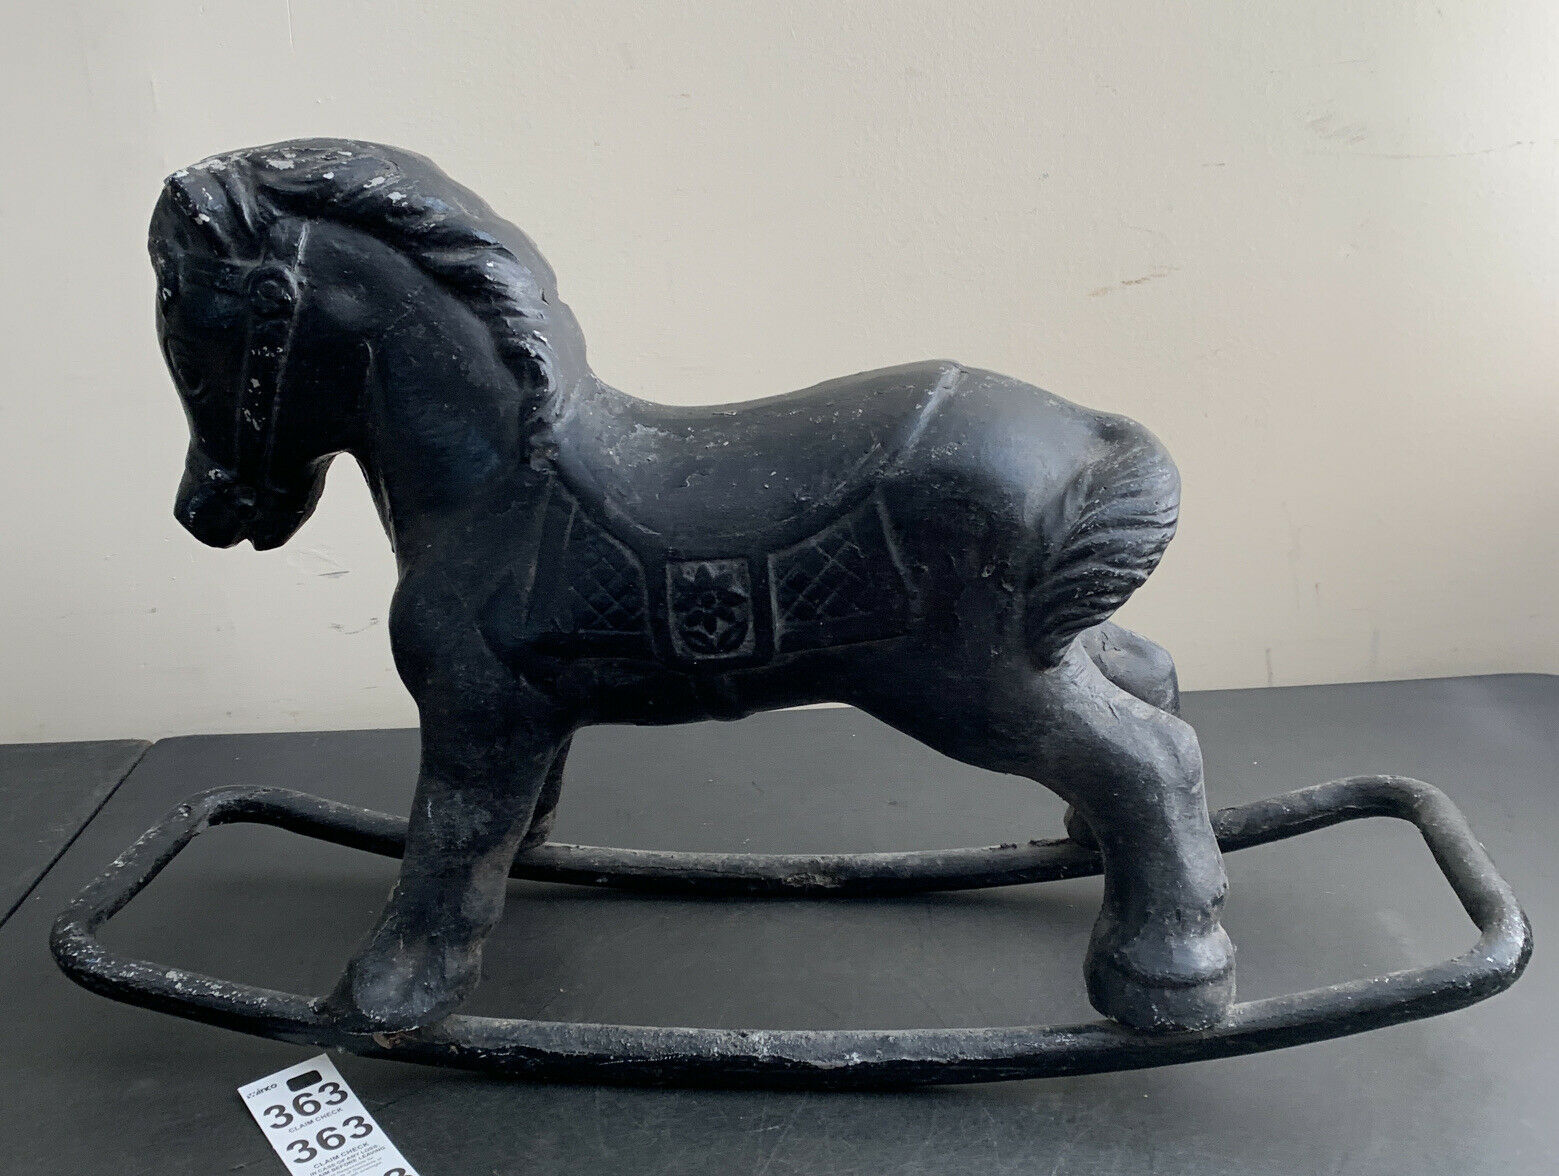 Vintage Antique Heavy All Metal Rocking Pony Horse Painted Over Statue Toy Decor